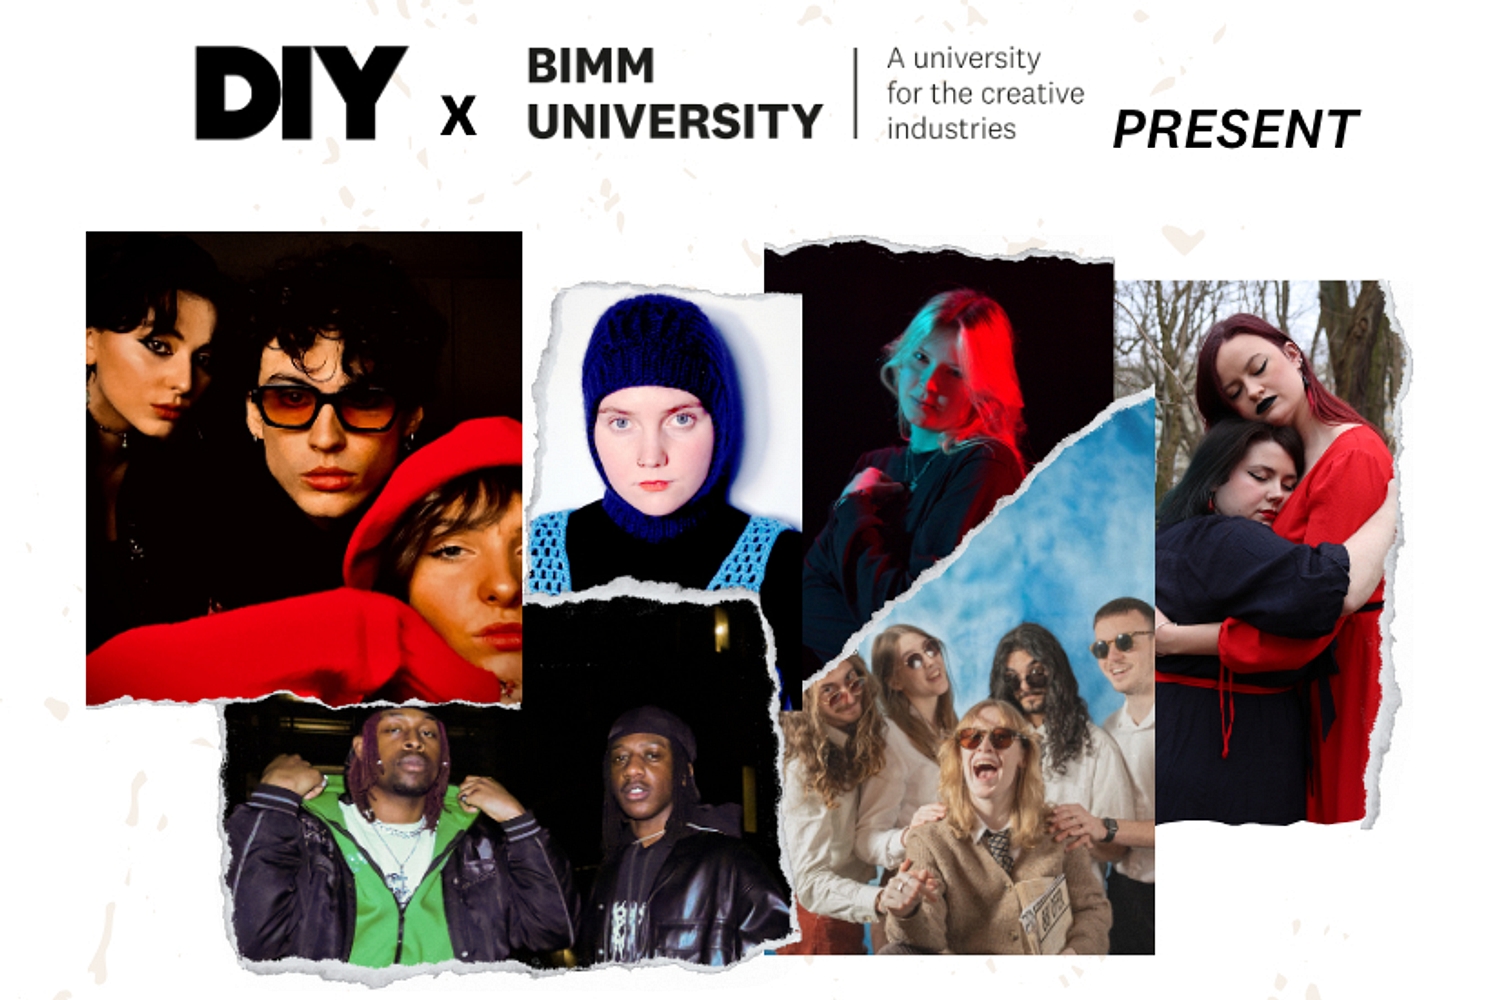 DIY partners with BIMM University for The Great Escape Festival events programme